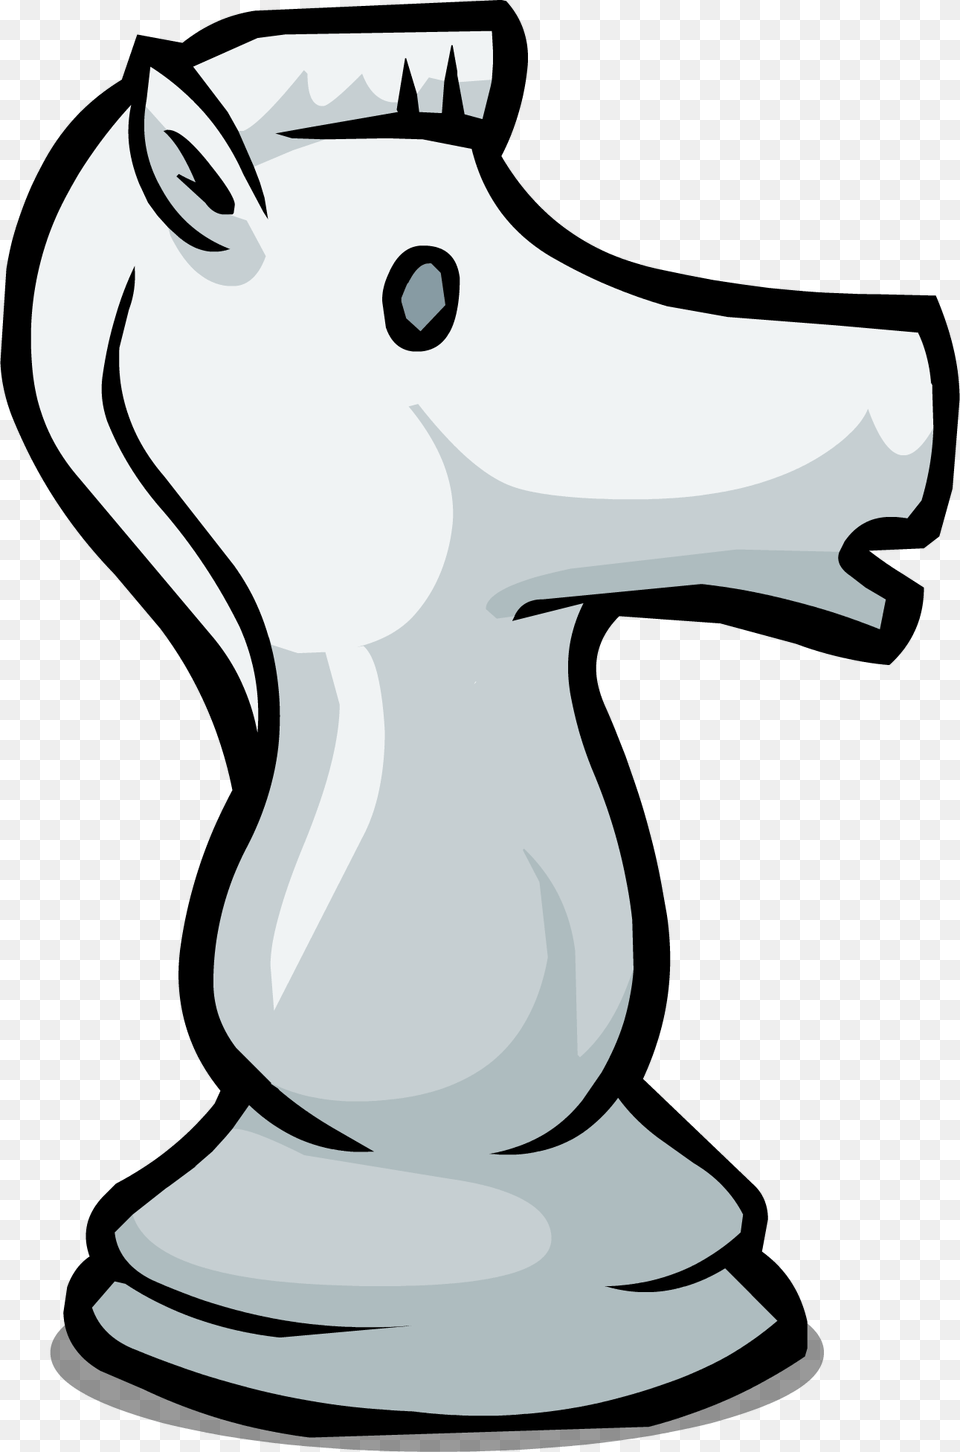 Chess Knight Club Penguin Wiki Fandom Powered By Wikia Chess Horse Cartoon Transparent Background, Animal, Fish, Sea Life, Shark Free Png